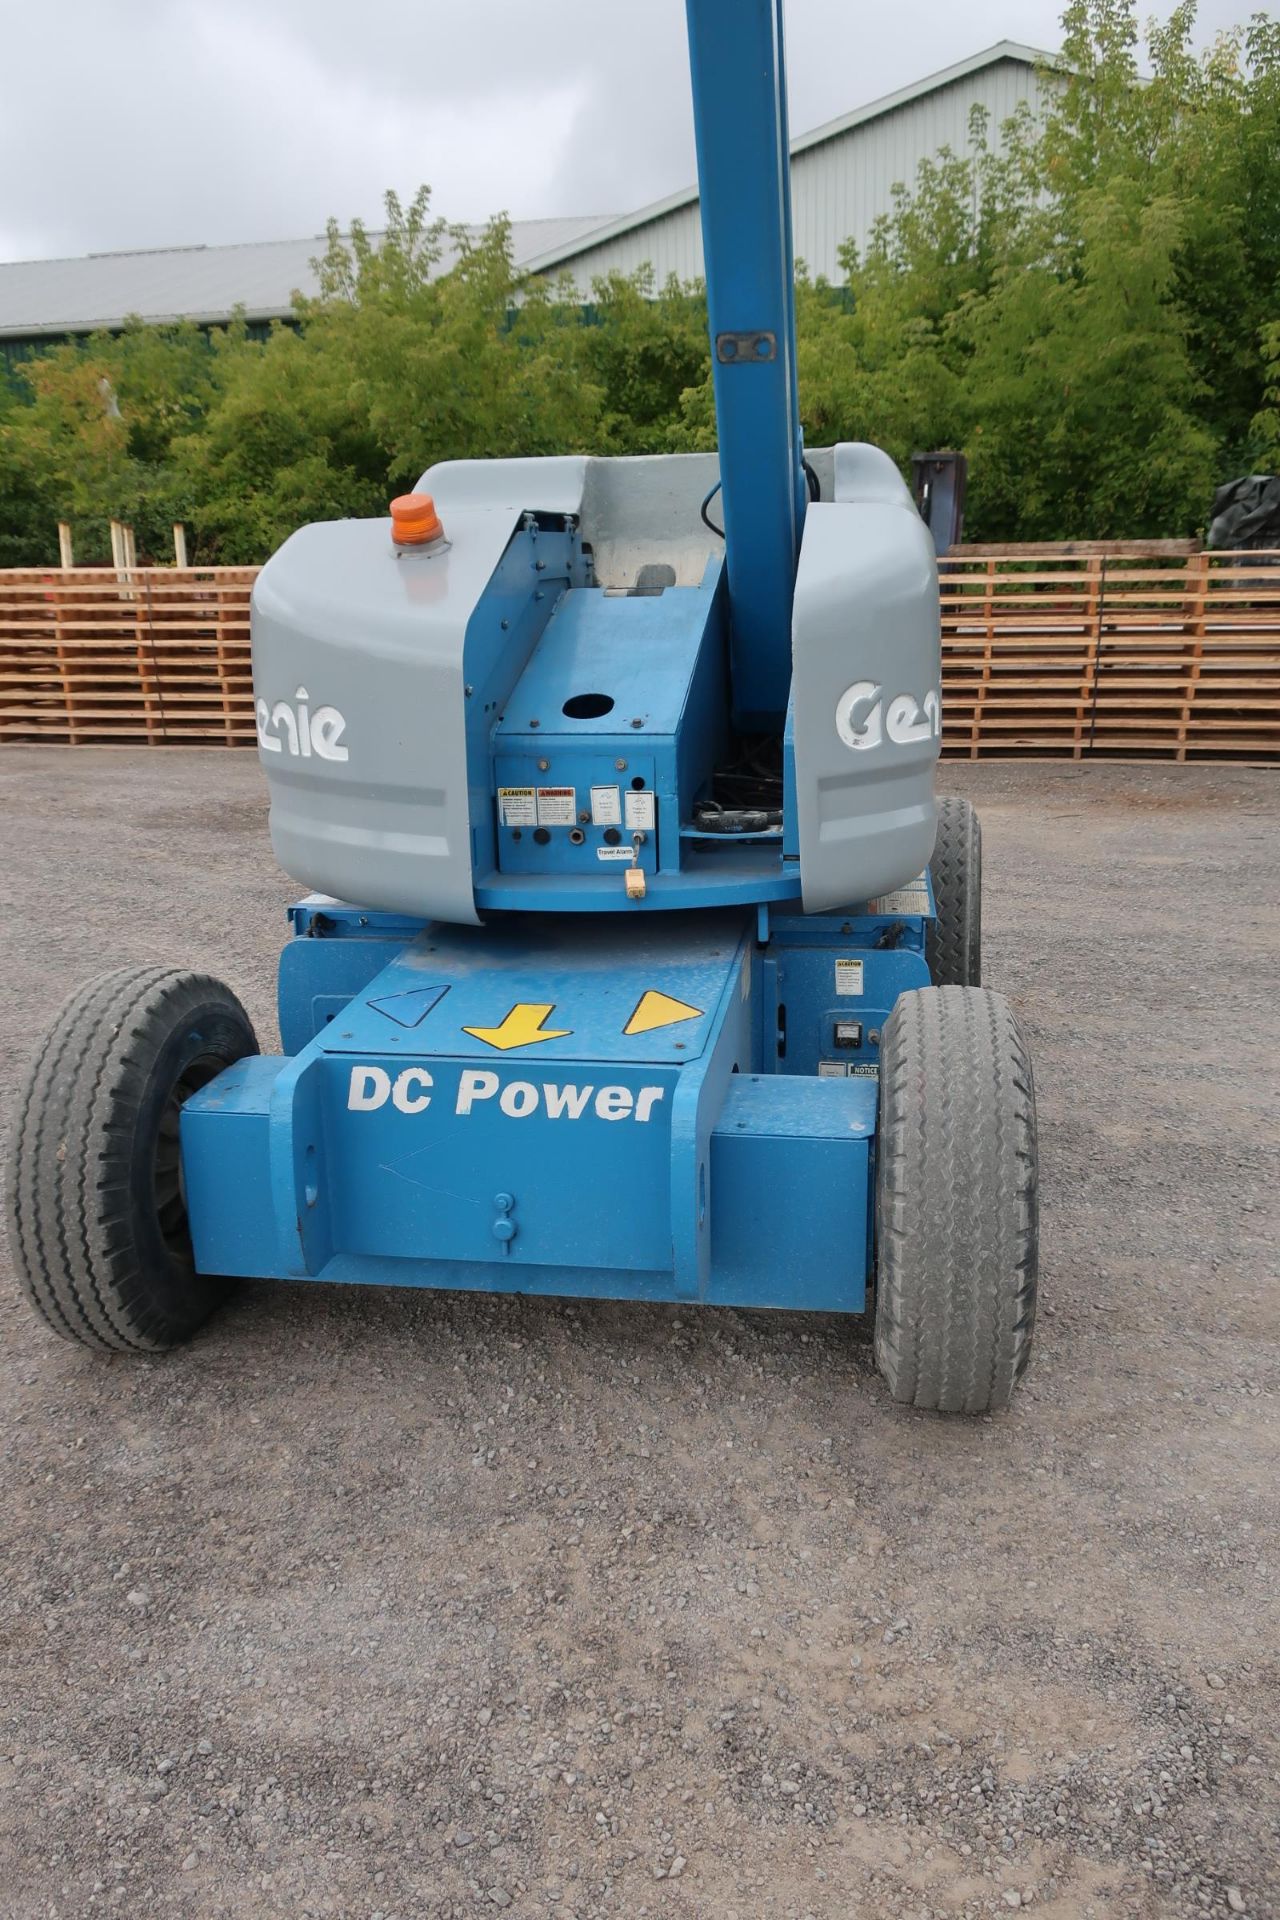 MINT Genie Zoom Boom Articulating Lift model Z-45/25 45' height Electric LOW HOURS with non- - Image 4 of 4